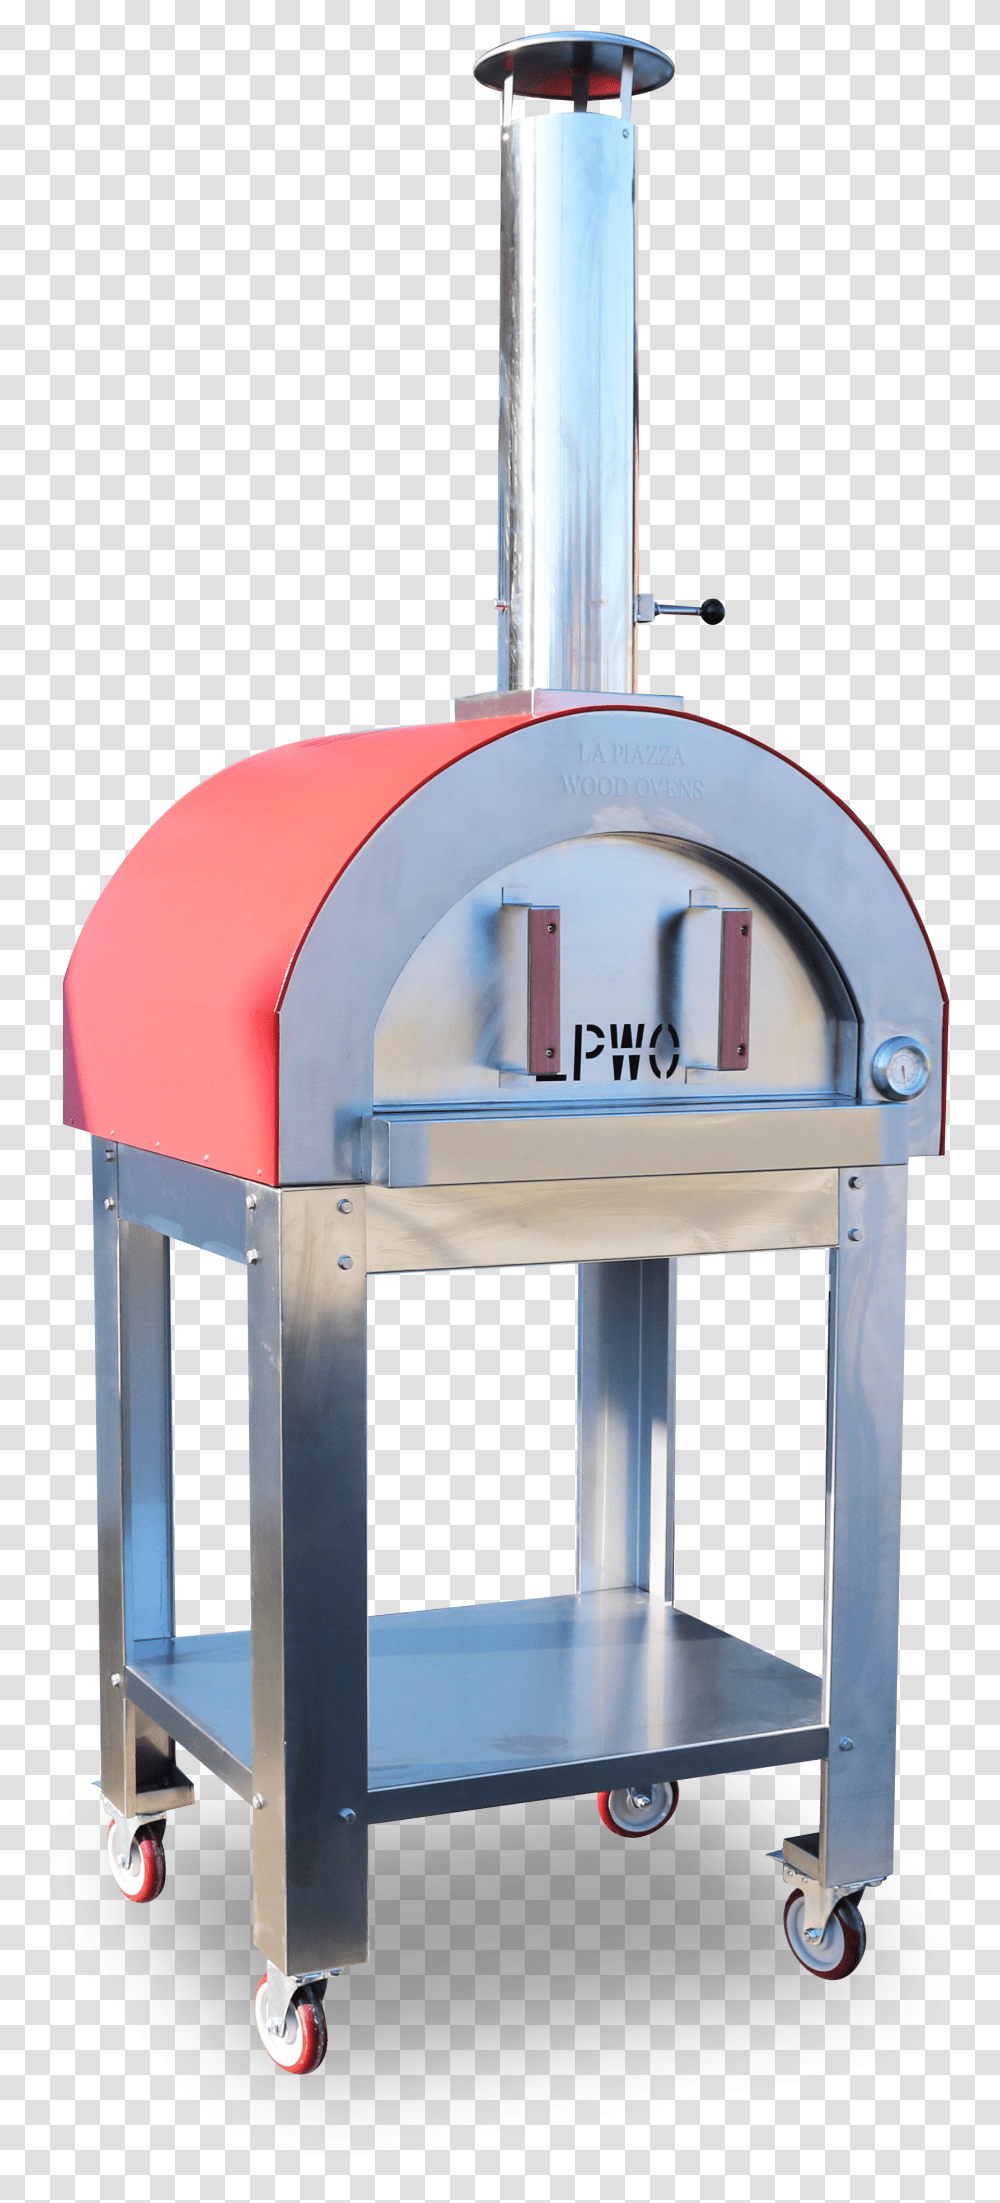 Piccolo Outdoor Wood Oven La Piazza Wood Oven, Mailbox, Letterbox, Postbox, Public Mailbox Transparent Png